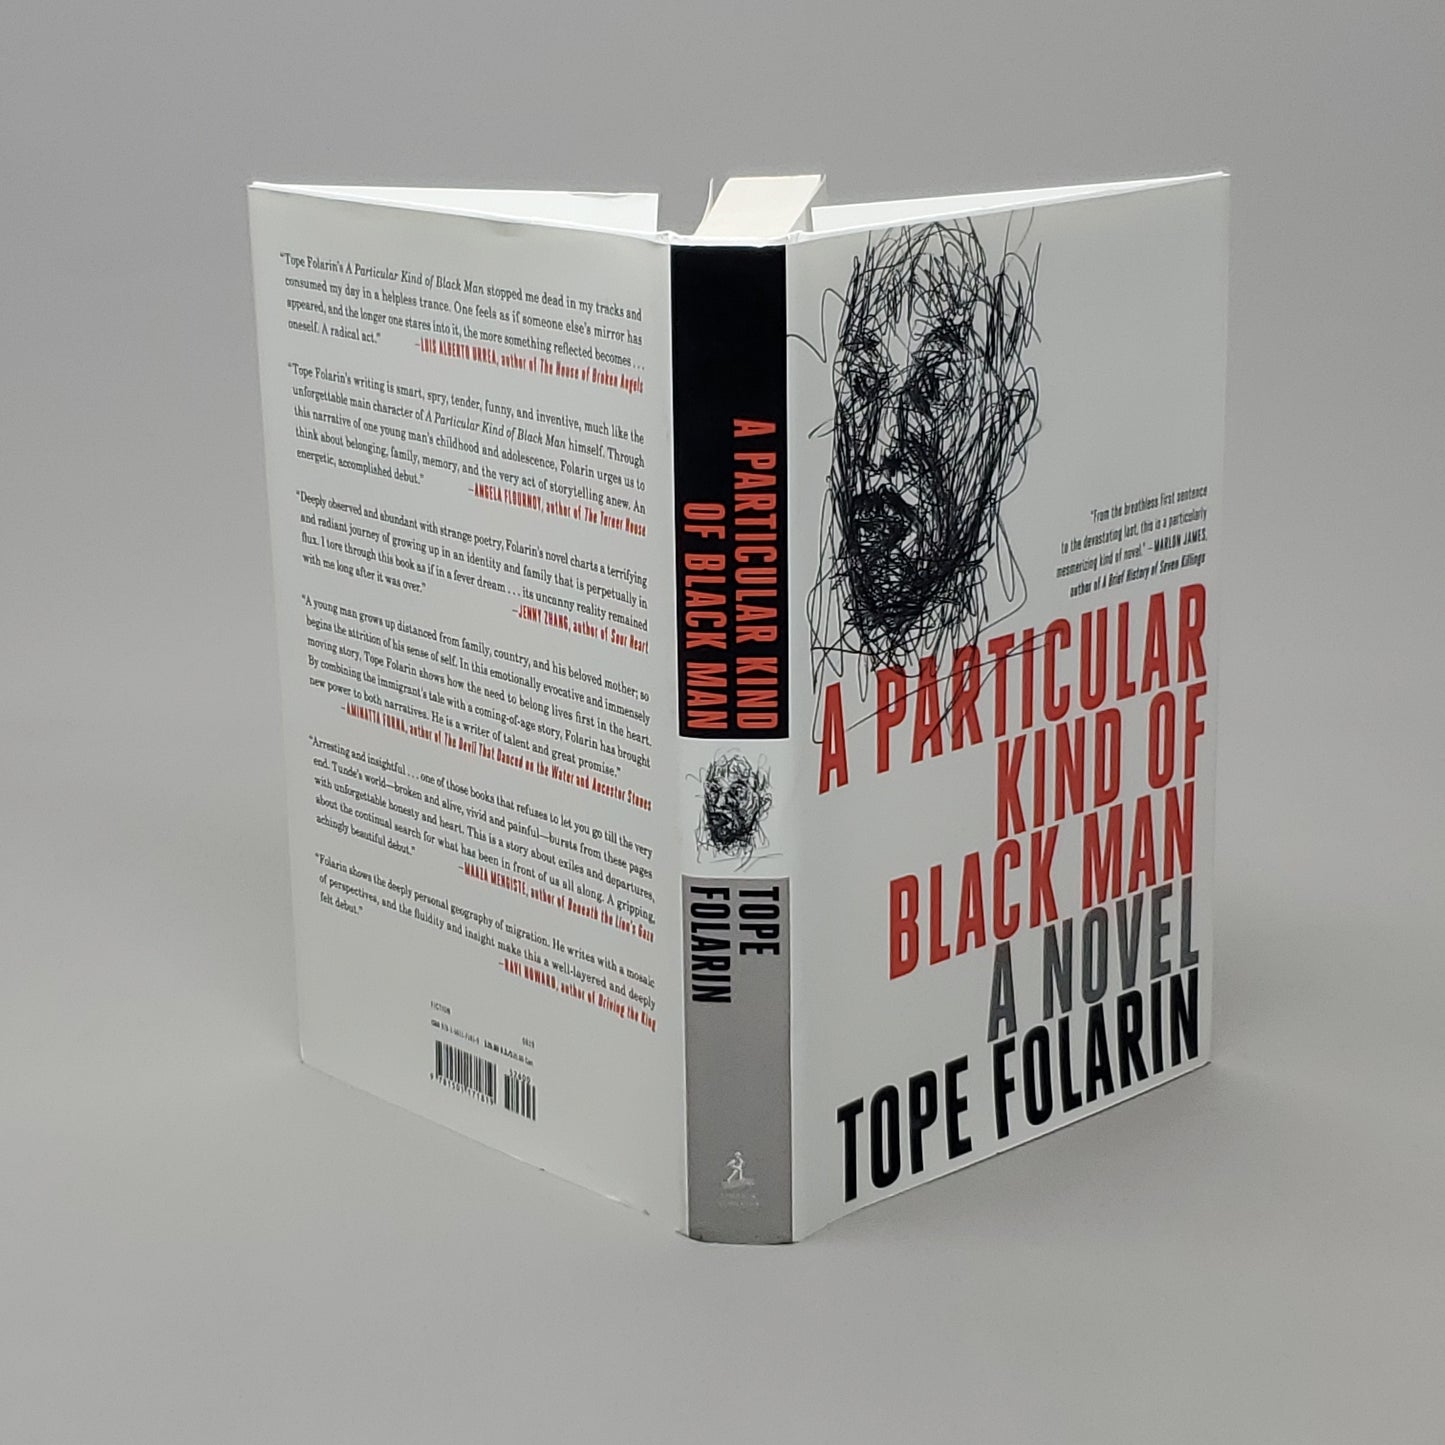 A PARTICULAR KIND OF BLACK MAN by Tope Folarin Book Hardback (New)